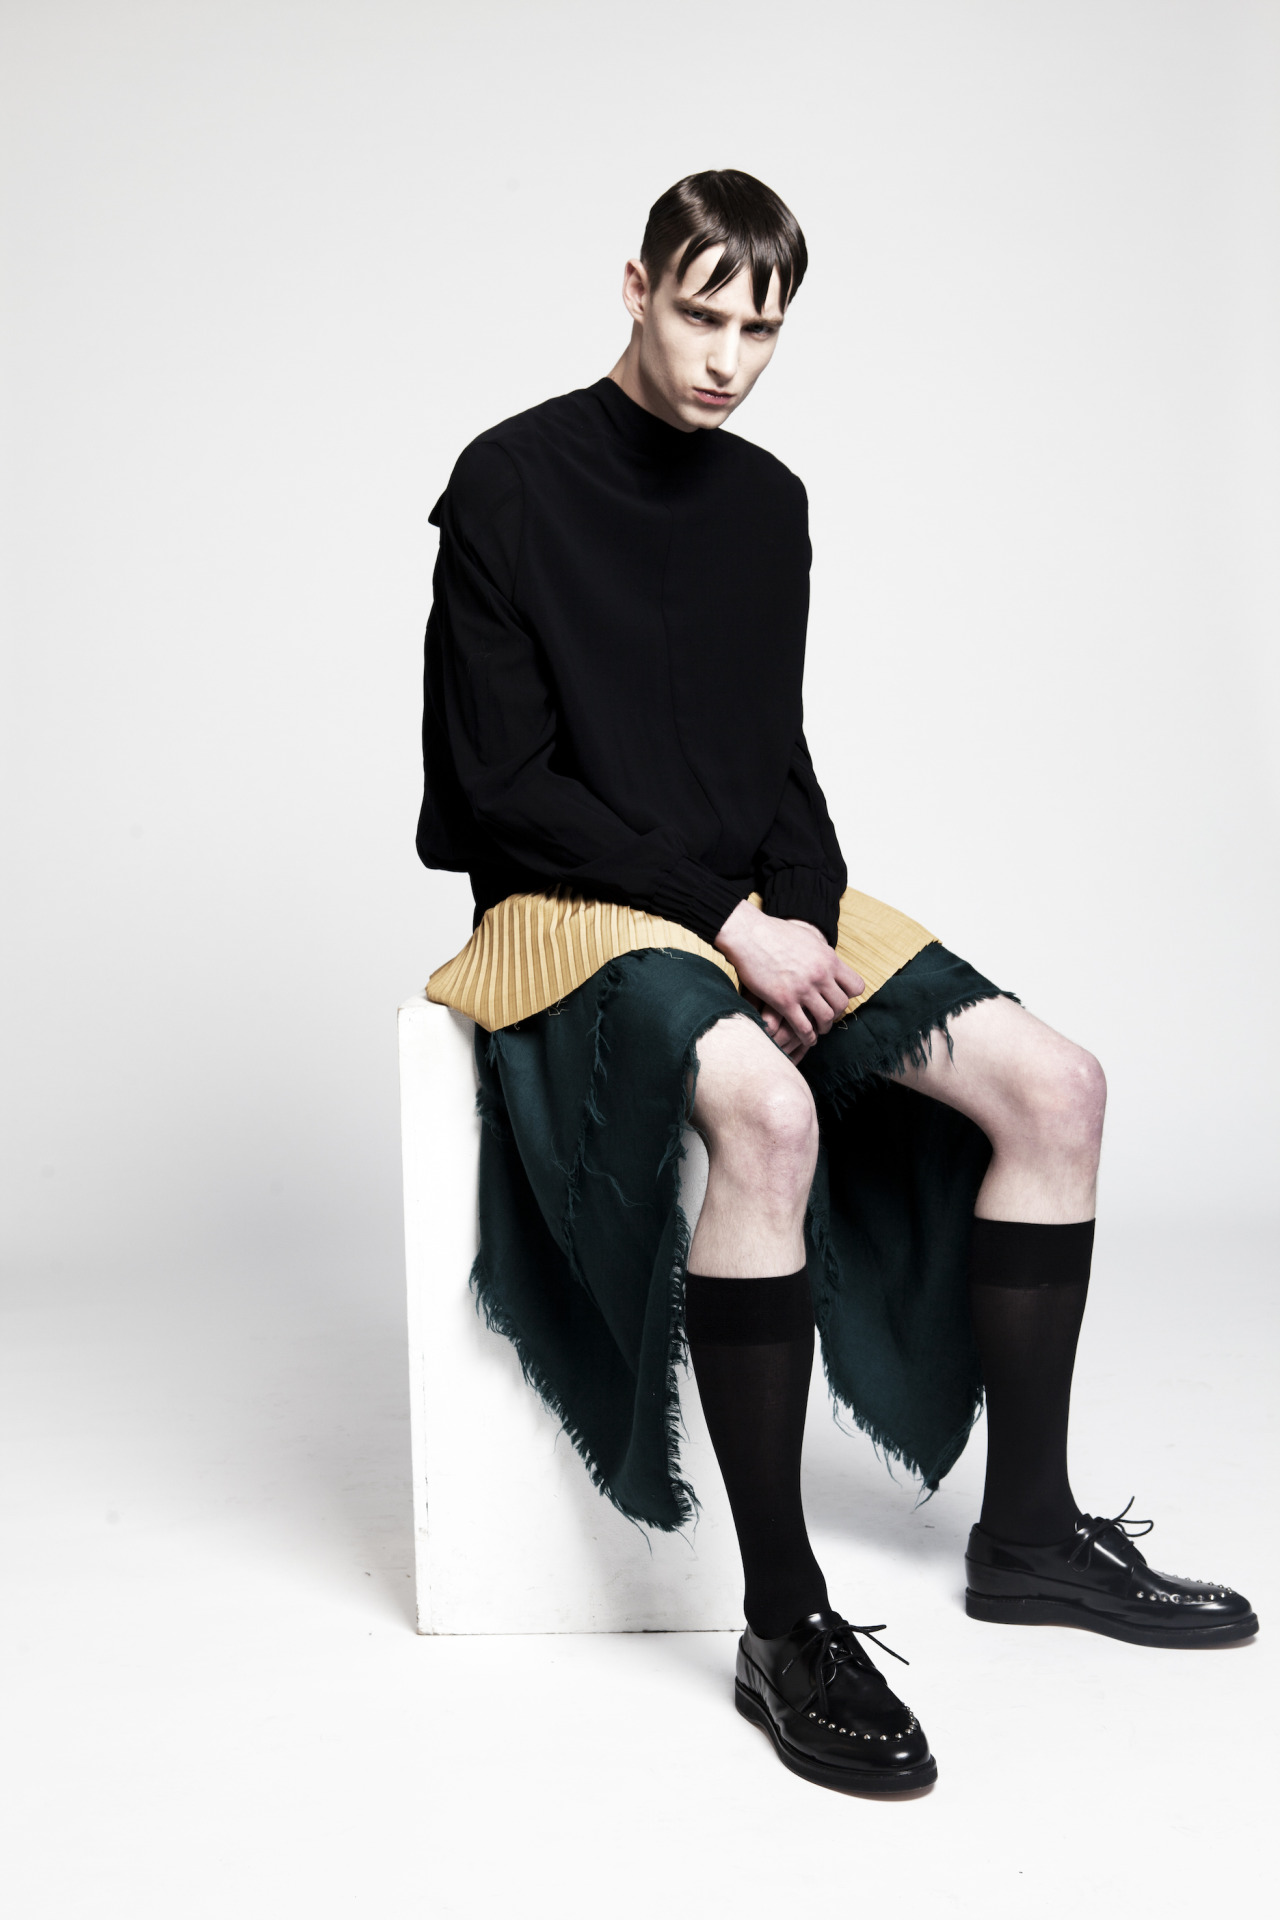 tomas-c-toth:  Laurie Harding shot by Jorge Perez Ortiz, styled by Tomas C. Toth